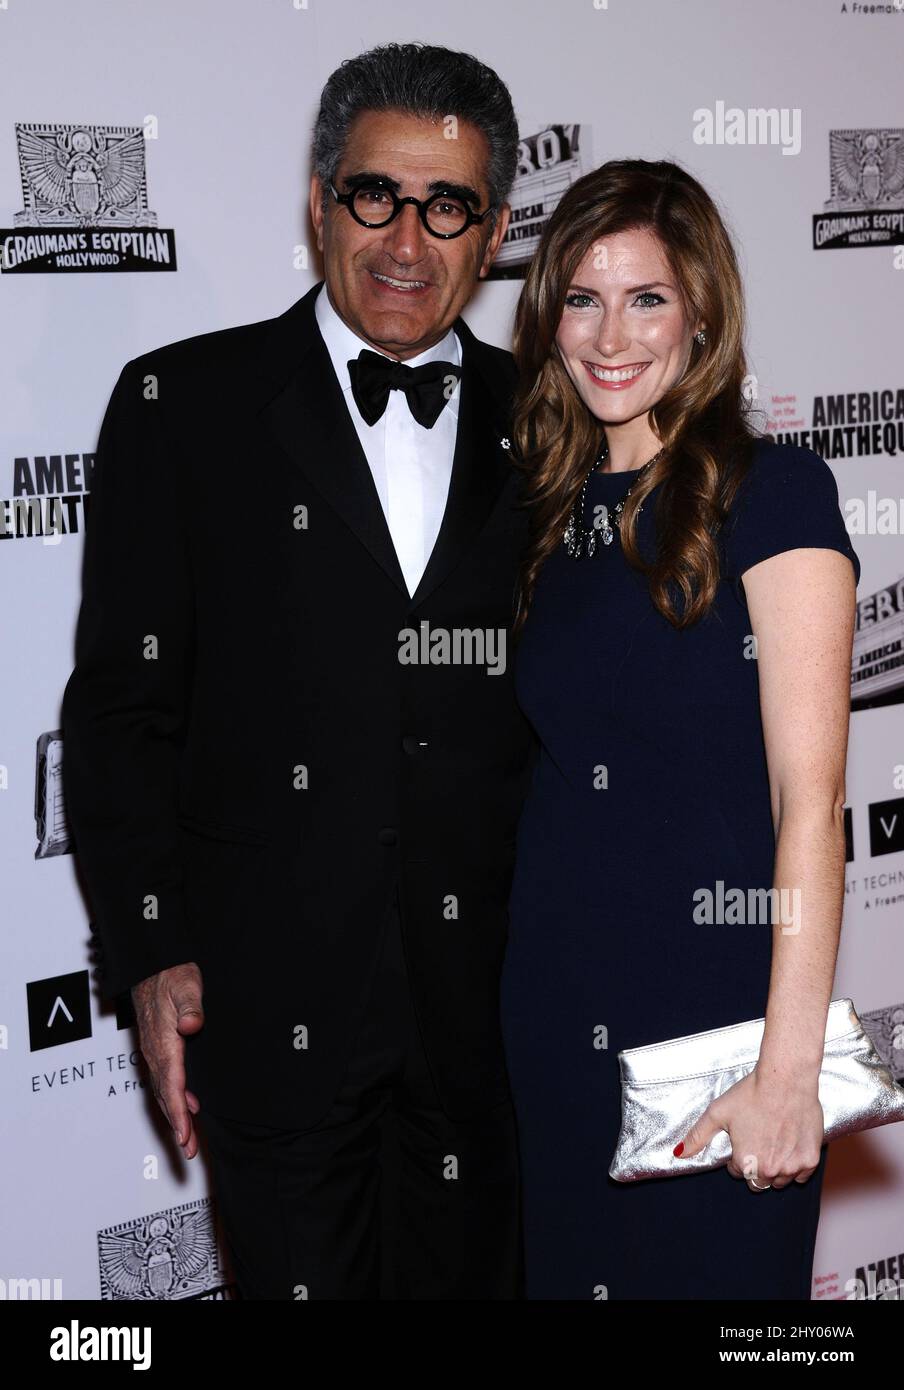 Eugene Levy & daughter Sara attends the American Cinematheque Honours Ben  Stiller at Hilton Hotel, Beverly Hills, California on November 15, 2012  Stock Photo - Alamy